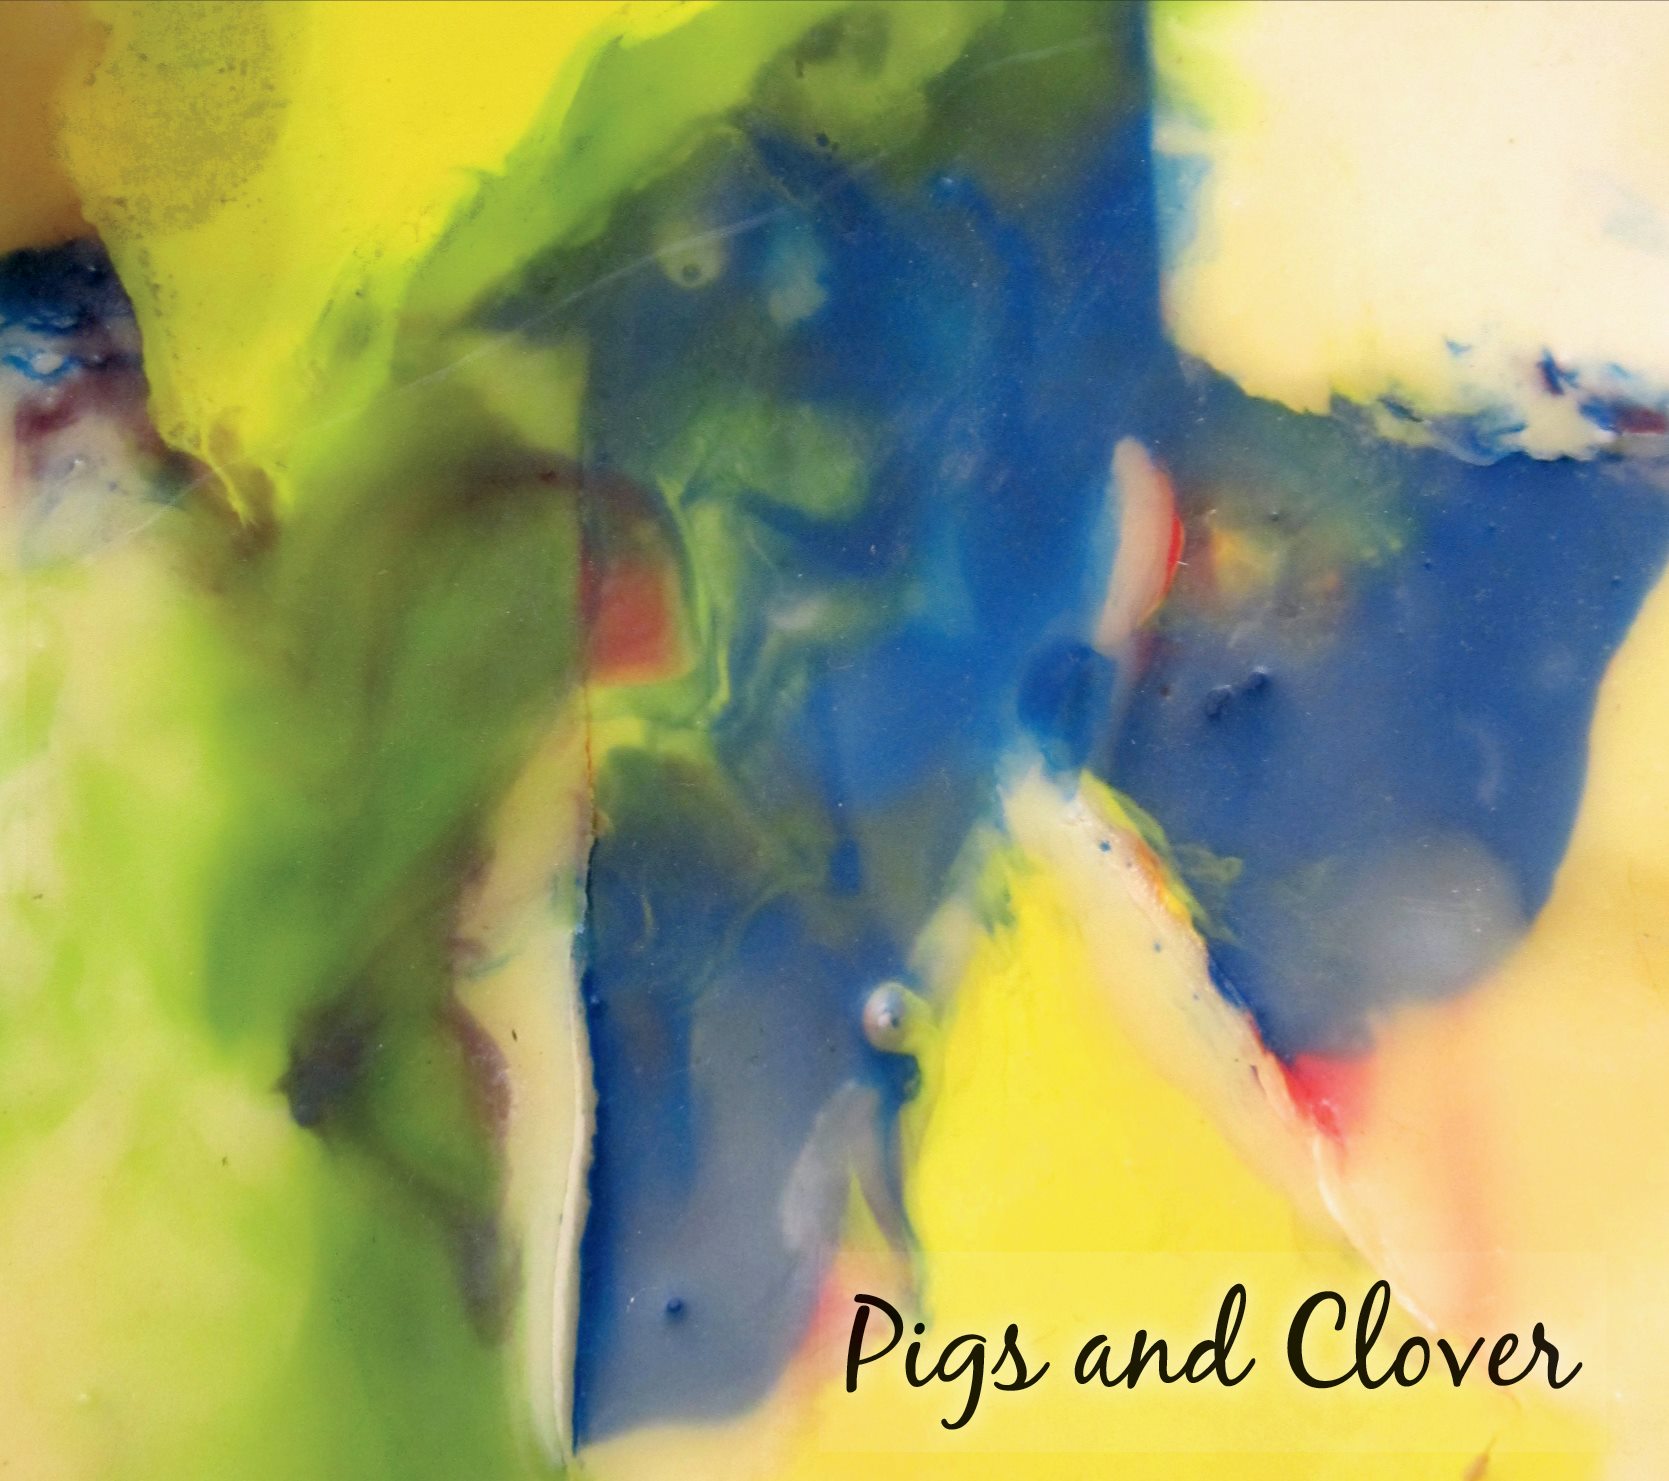 Pigs and Clover